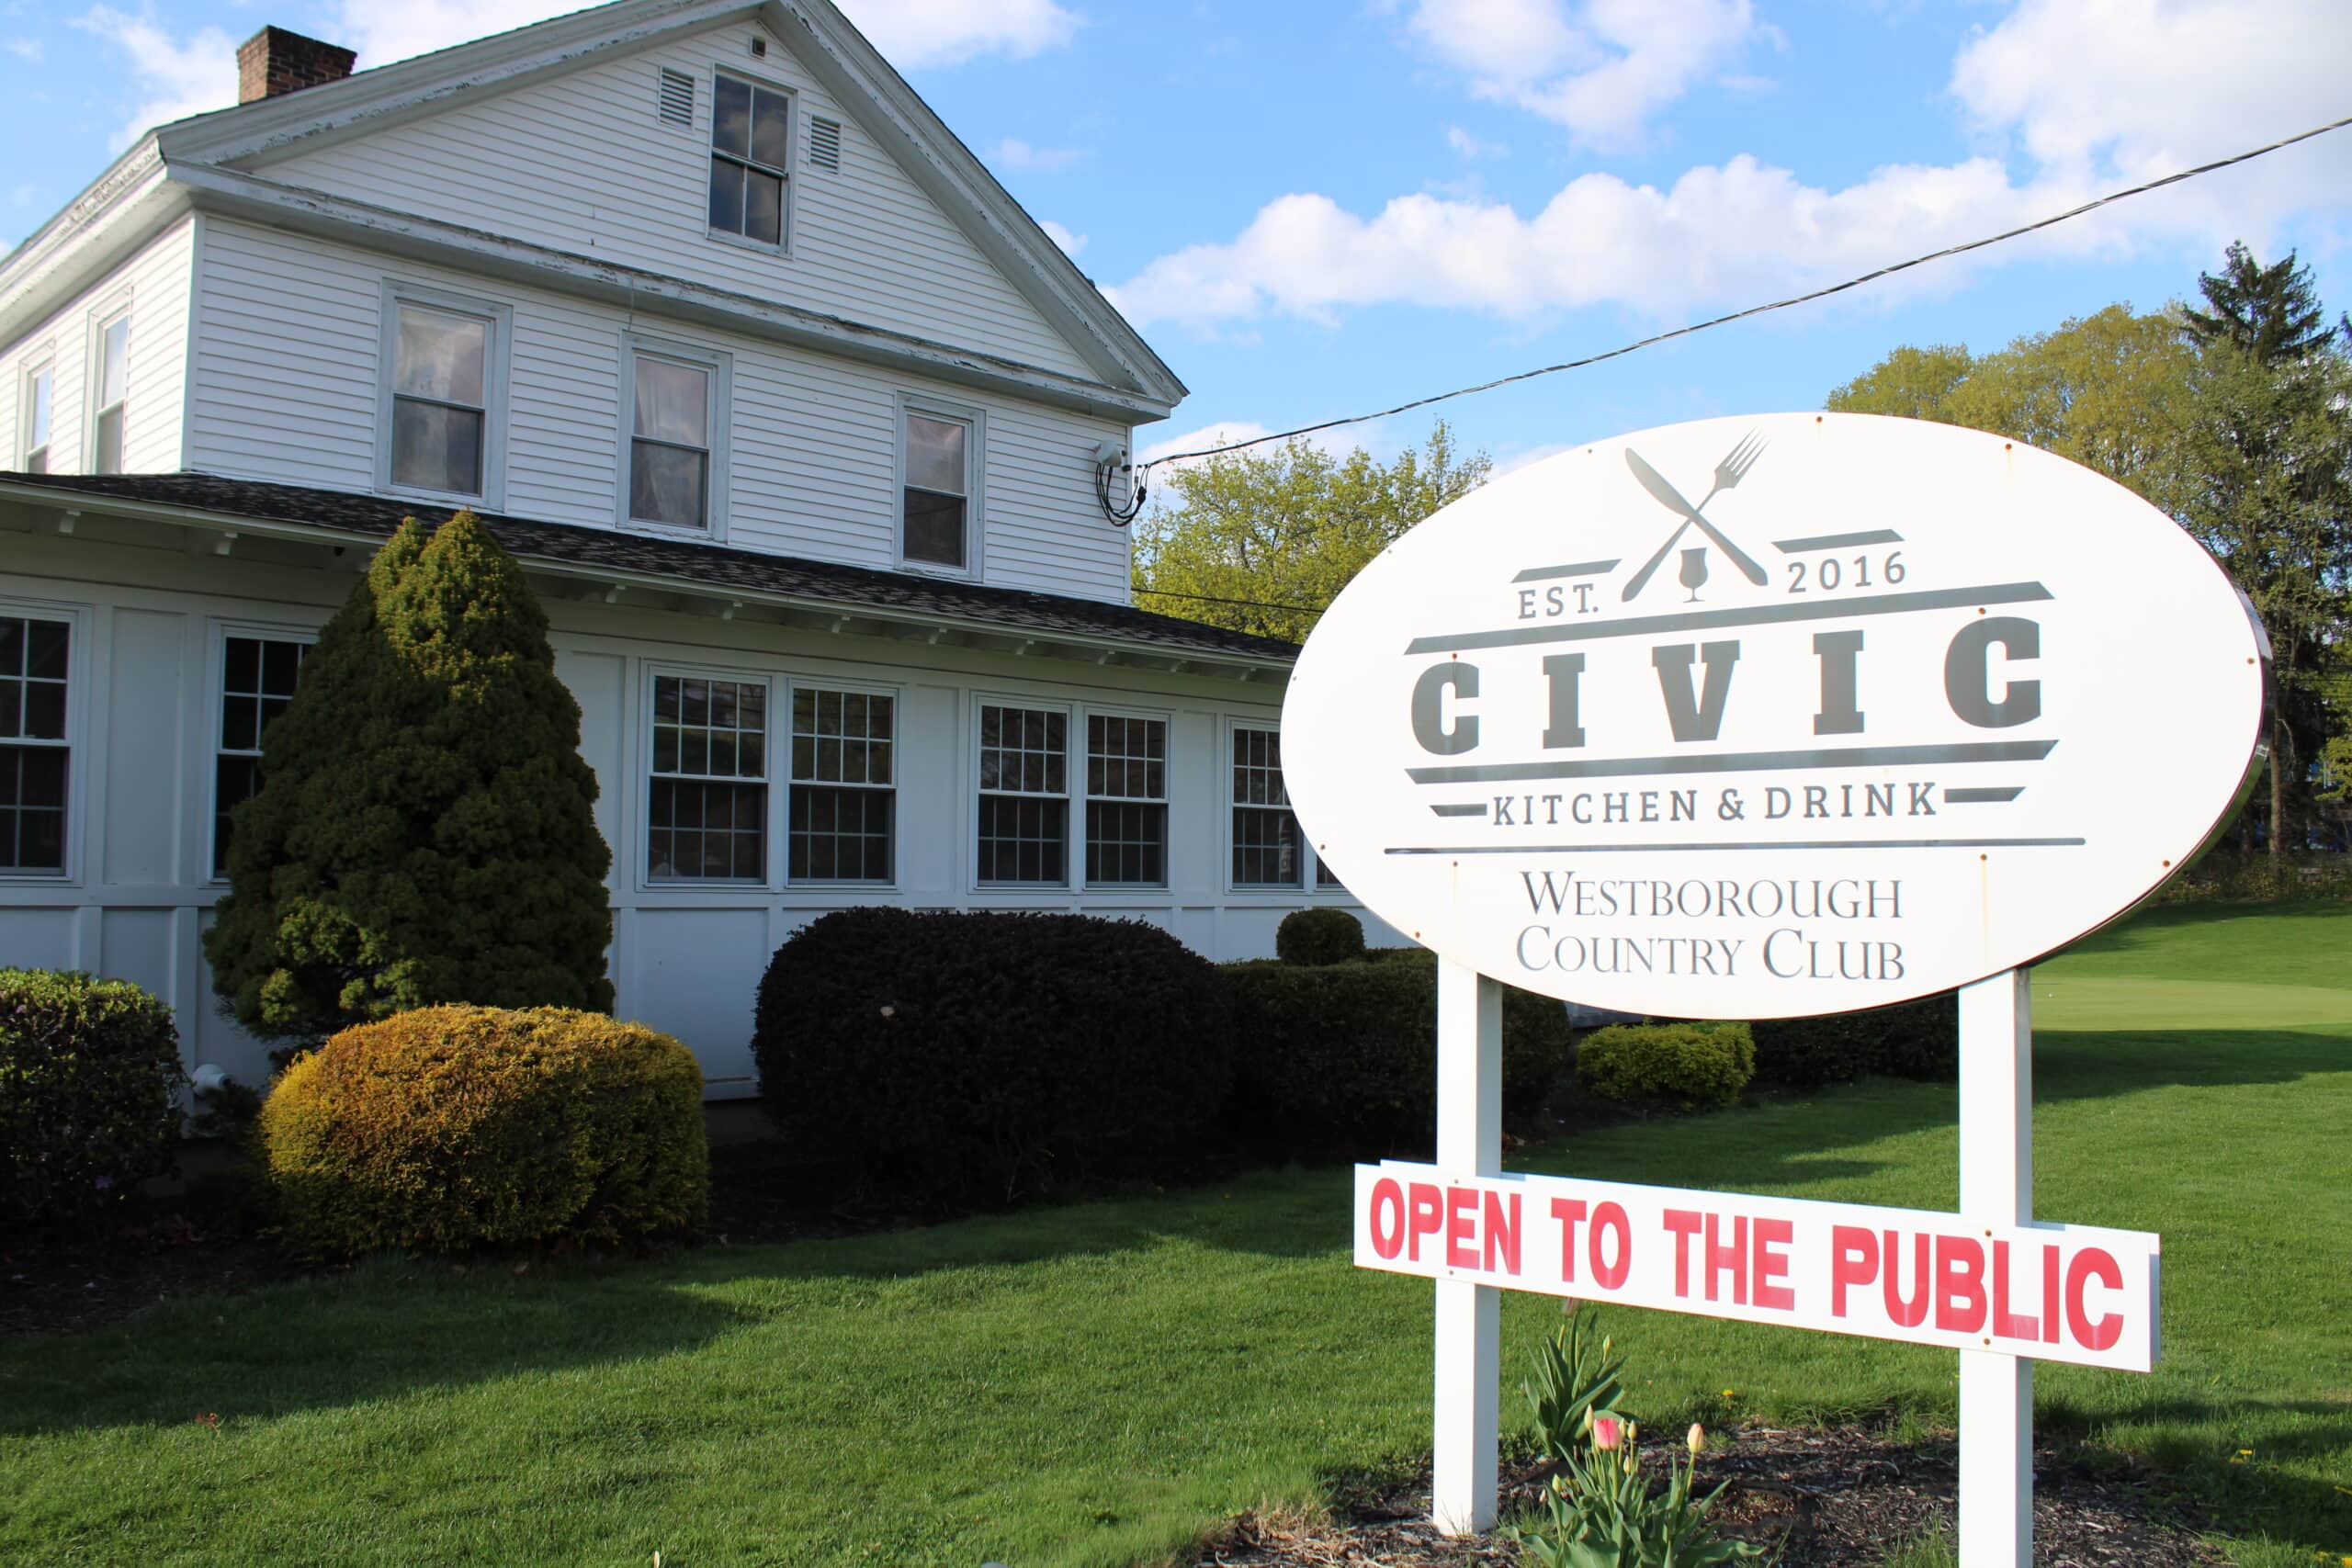 The next steps begin for former Civic Kitchen space in Westborough